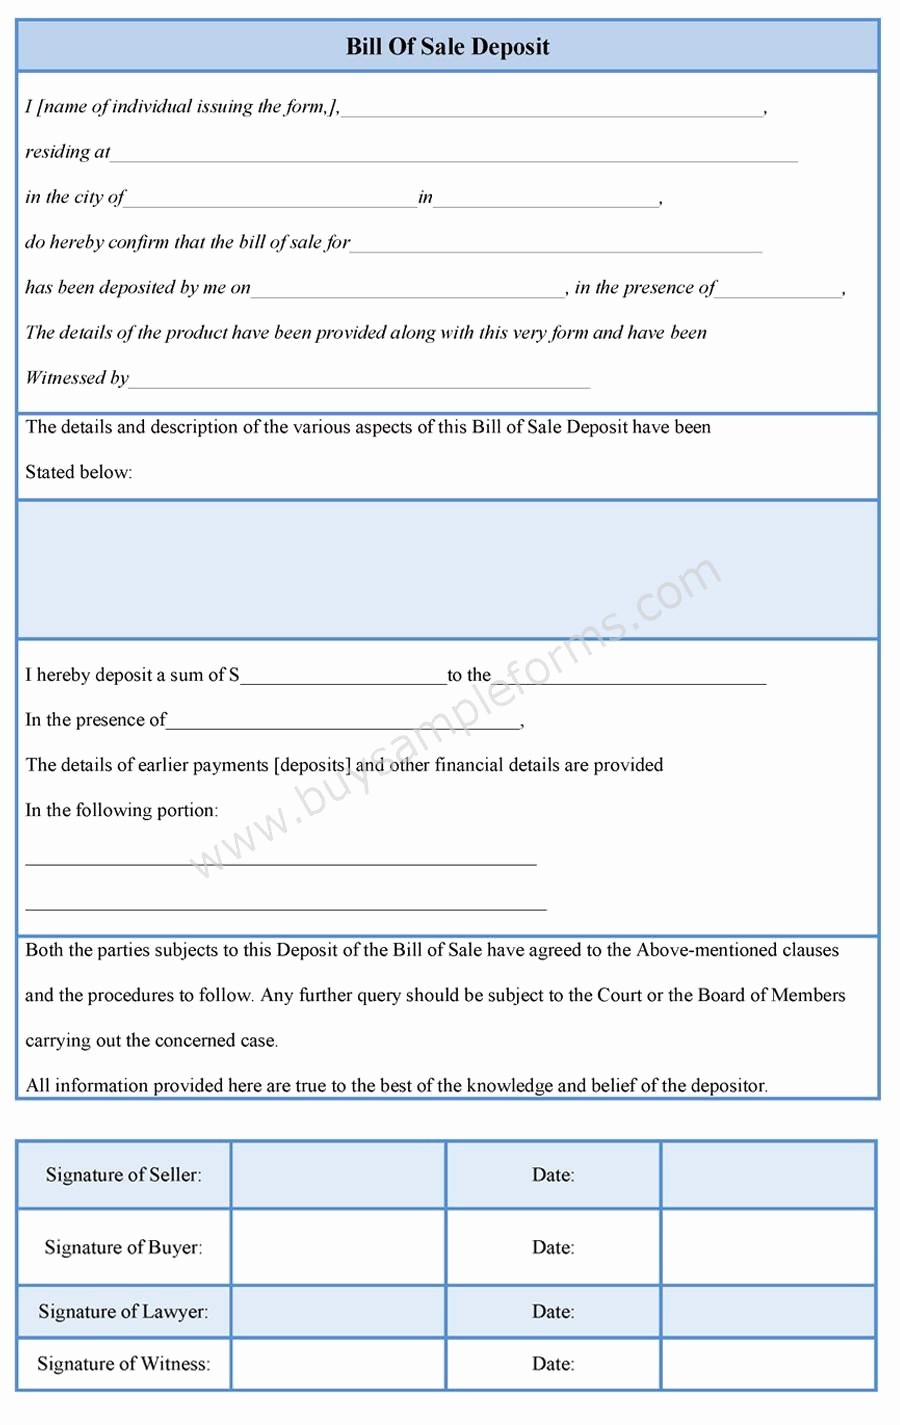 Bill Of Sale Example form New Bill Of Sale Deposit form Bill Of Sale forms